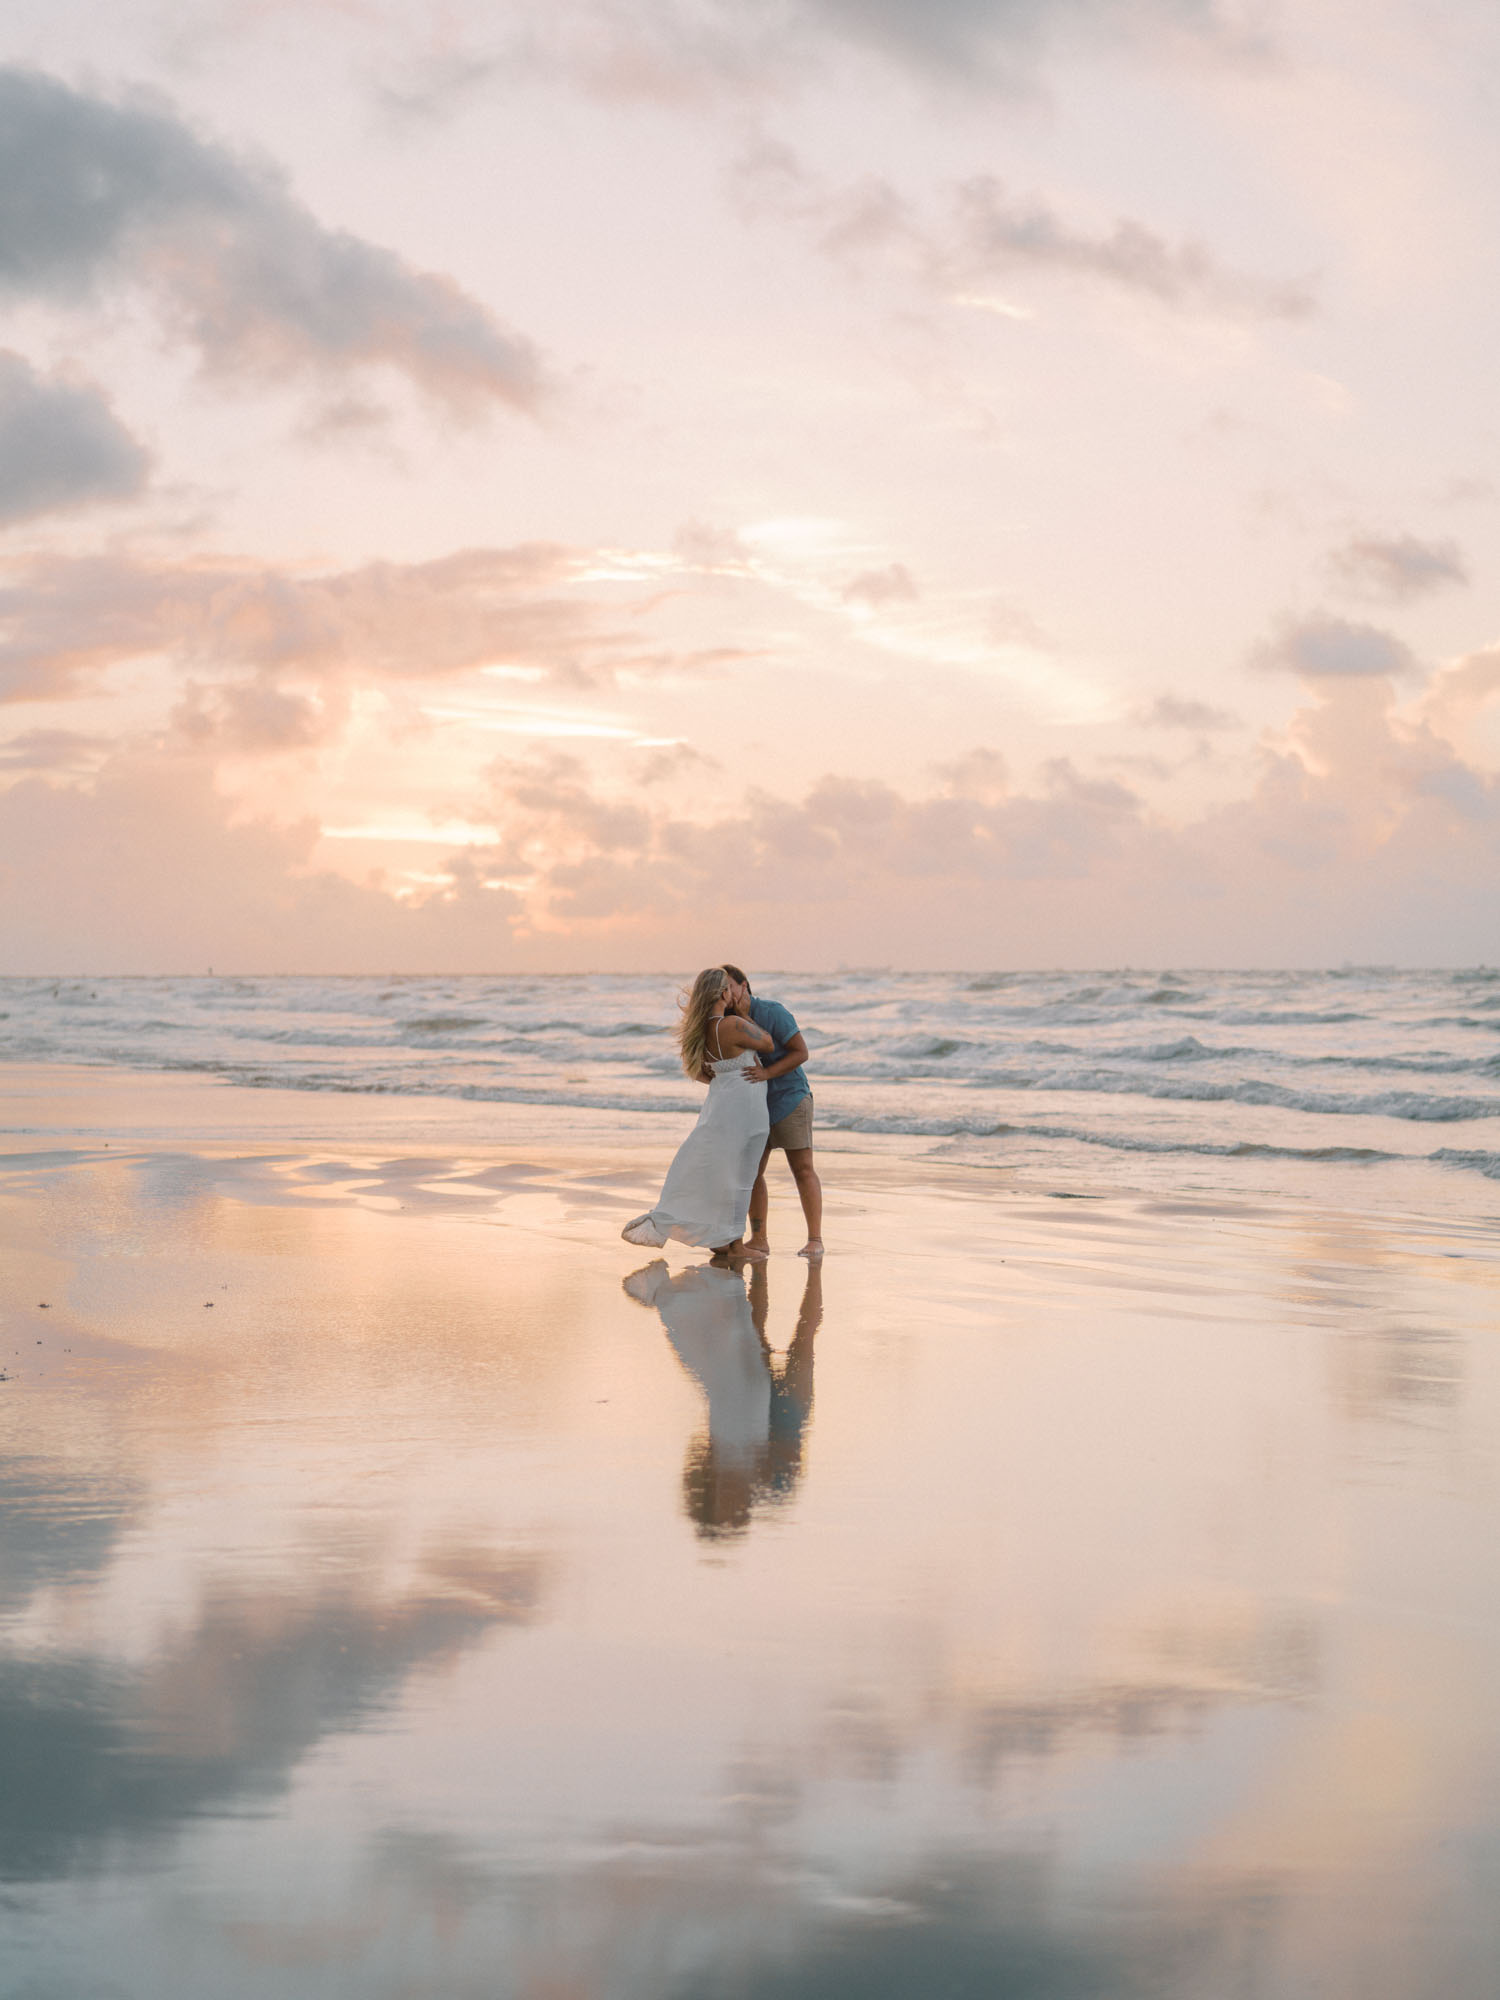 Glowing sunrise engagement session on the beach after Disney World proposal | Caitlin Rose Photography | Featured on Equally Wed, the leading LGBTQ+ wedding magazine